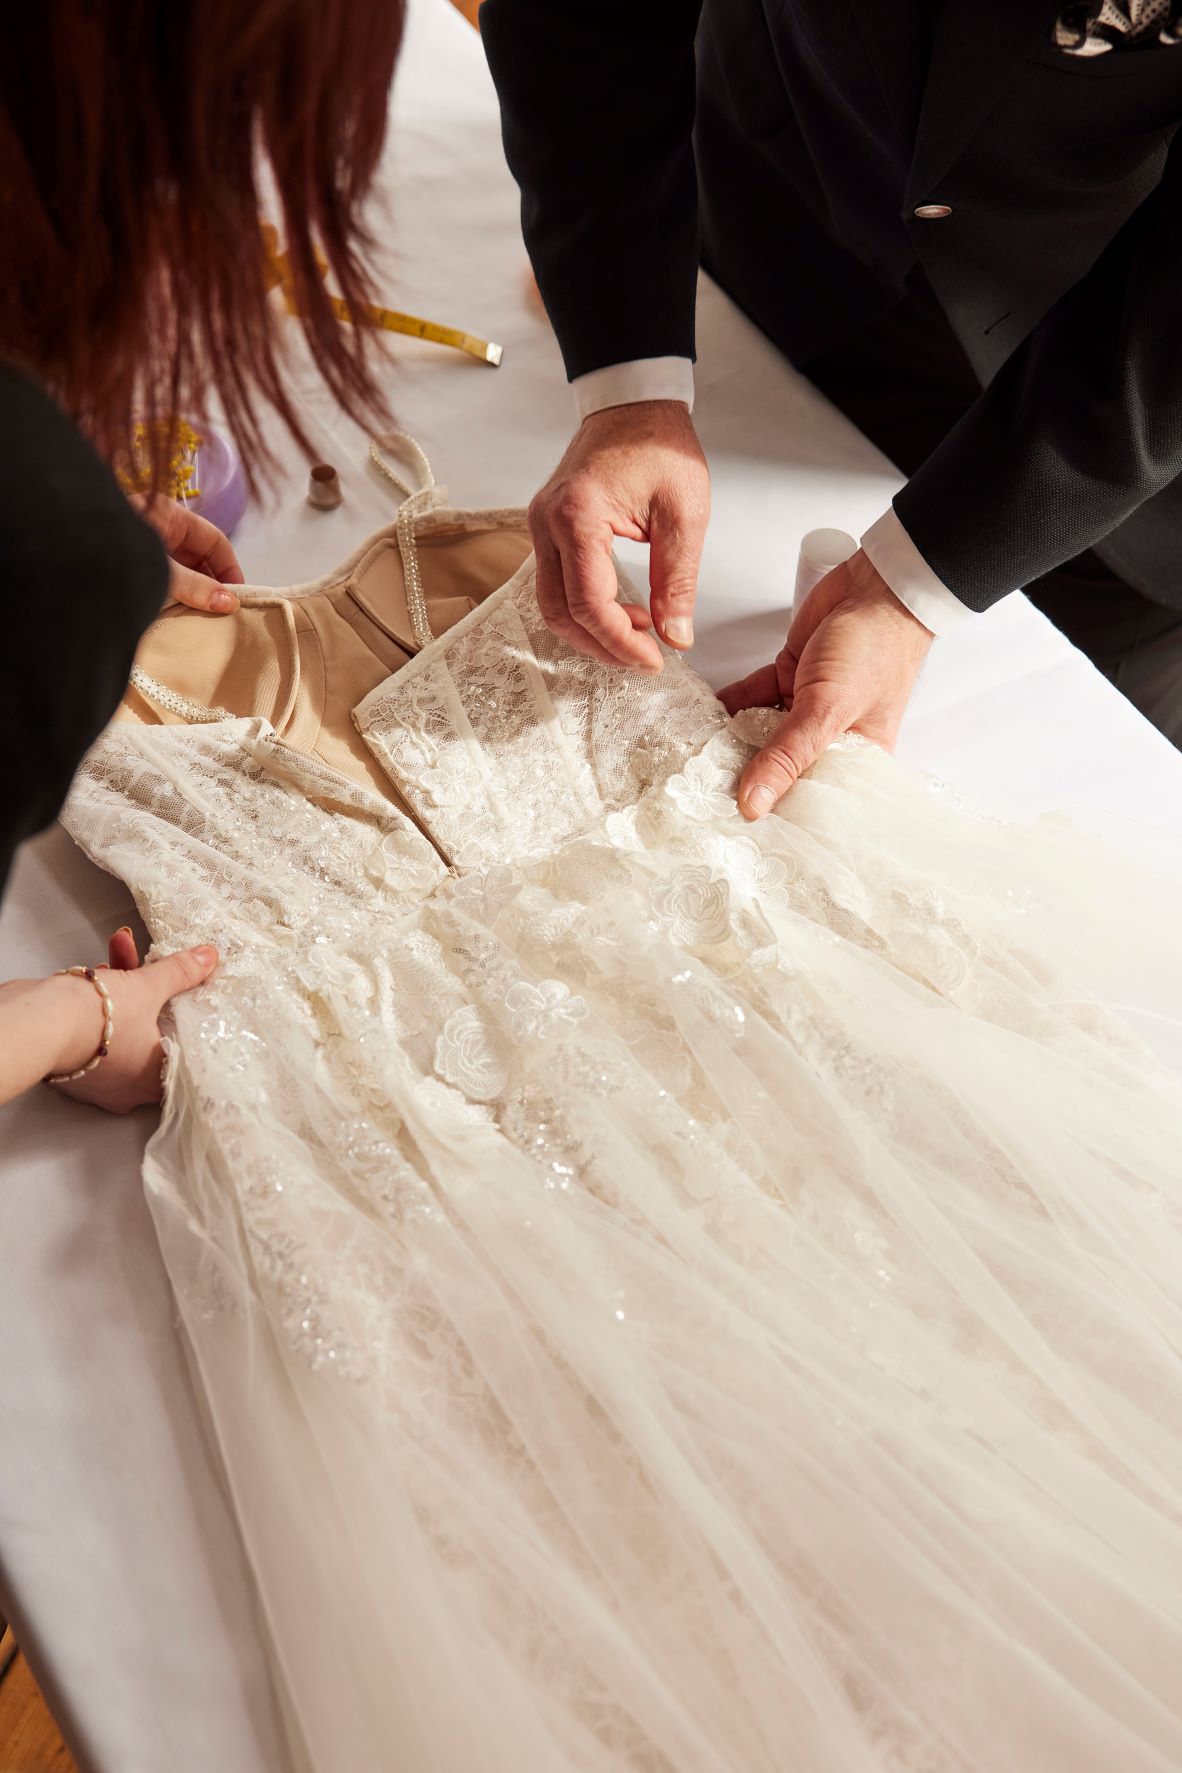 What is The Proper Length a Wedding Dress Should be Hemmed? 